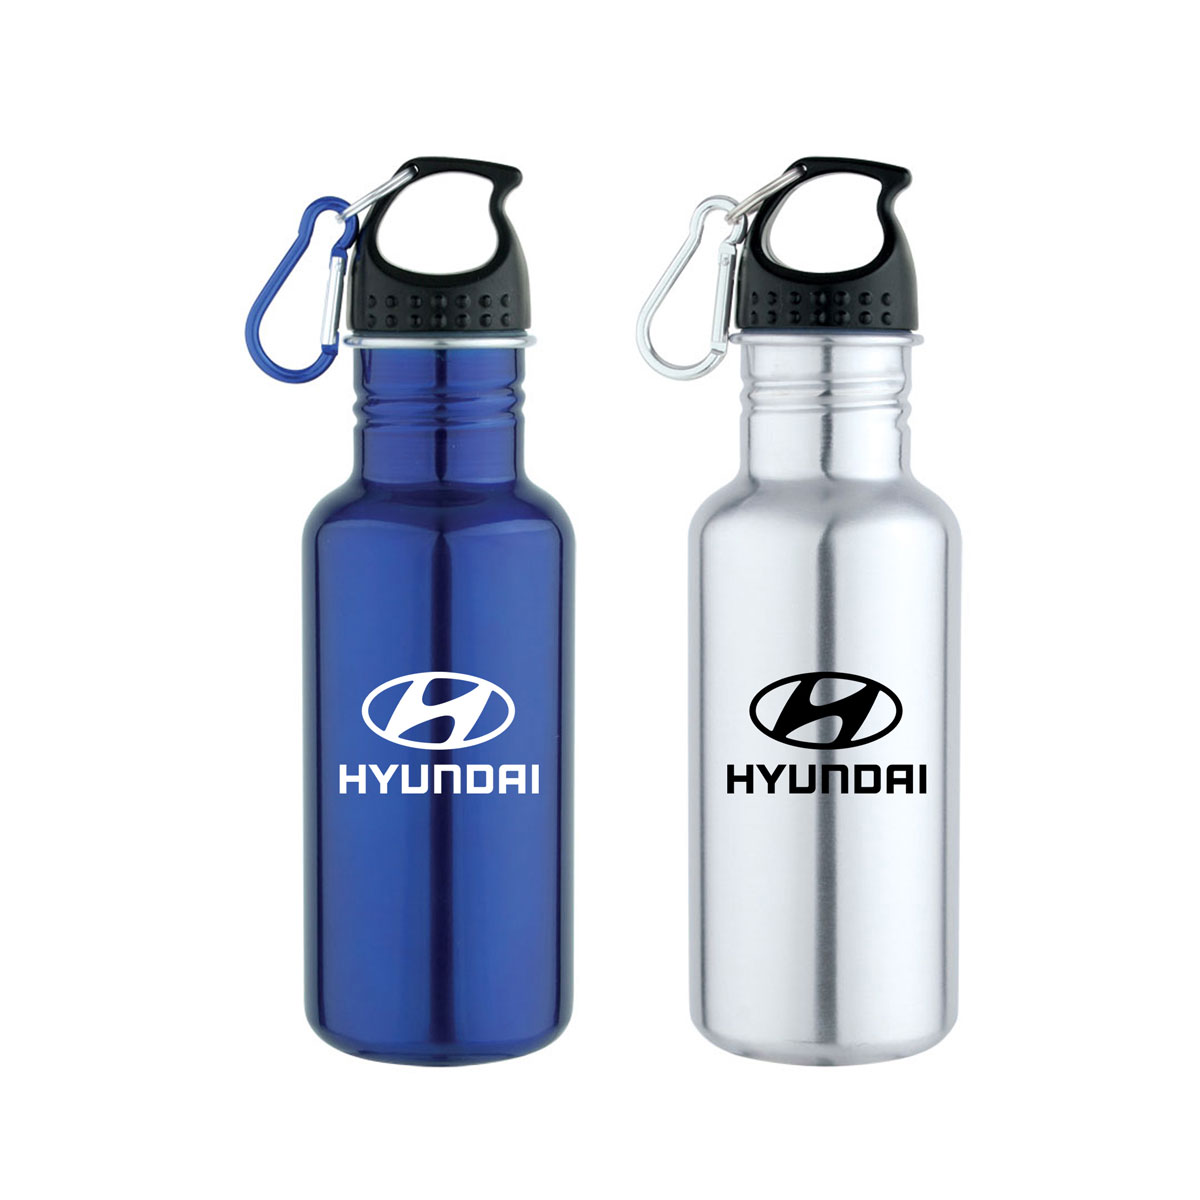 22oz. CANON STAINLESS STEEL WATER BOTTLE